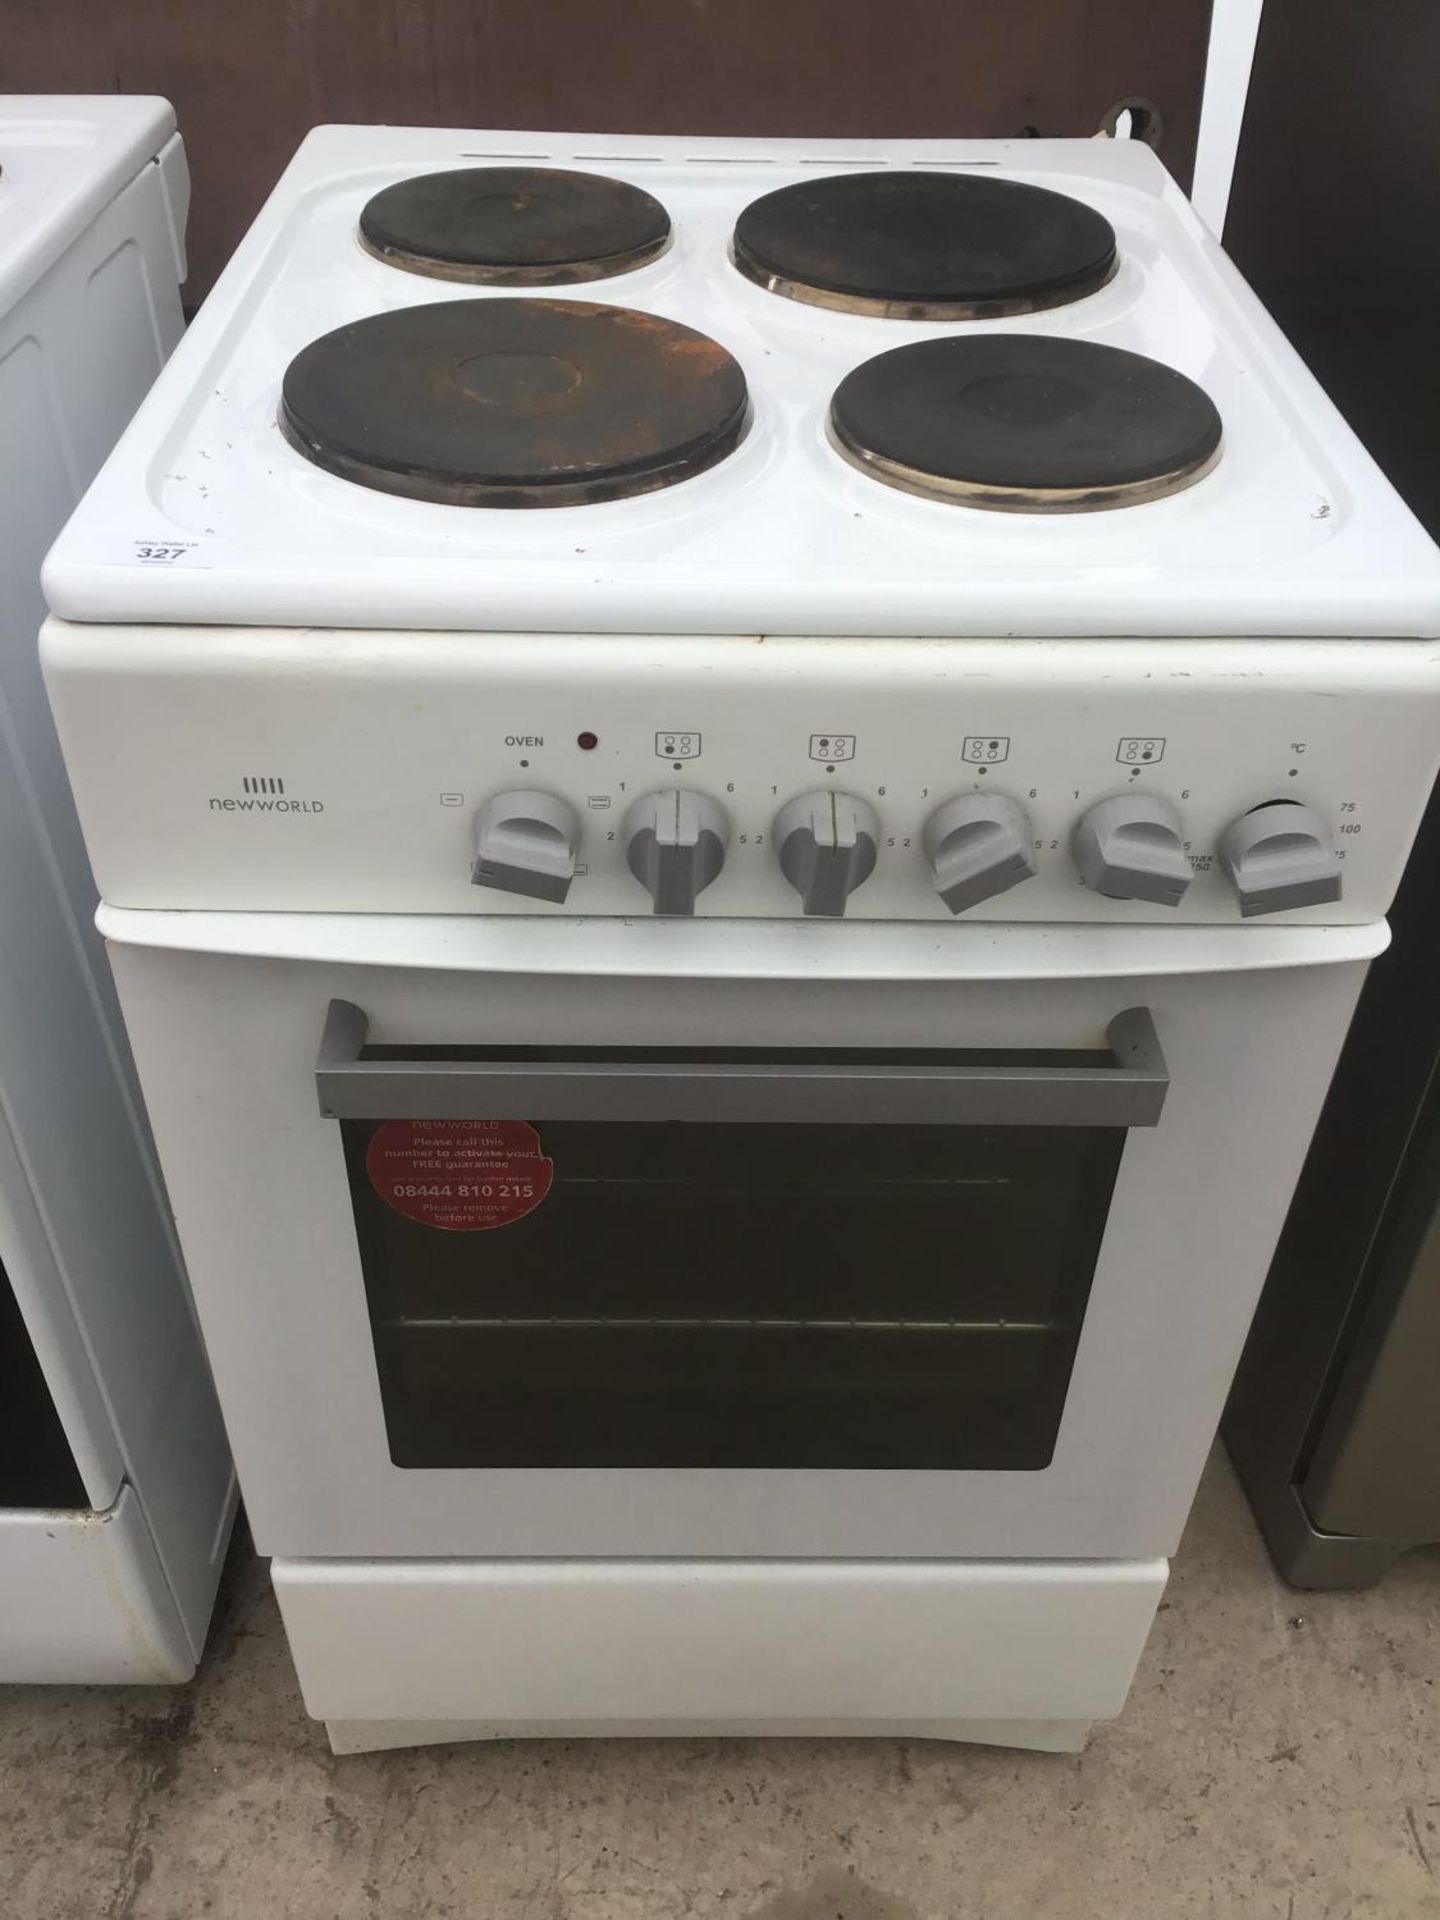 A NEW WORLD ELECTRIC OVEN WITH SOLID PLATE FOUR RING HOB (DIRECT WIRED)